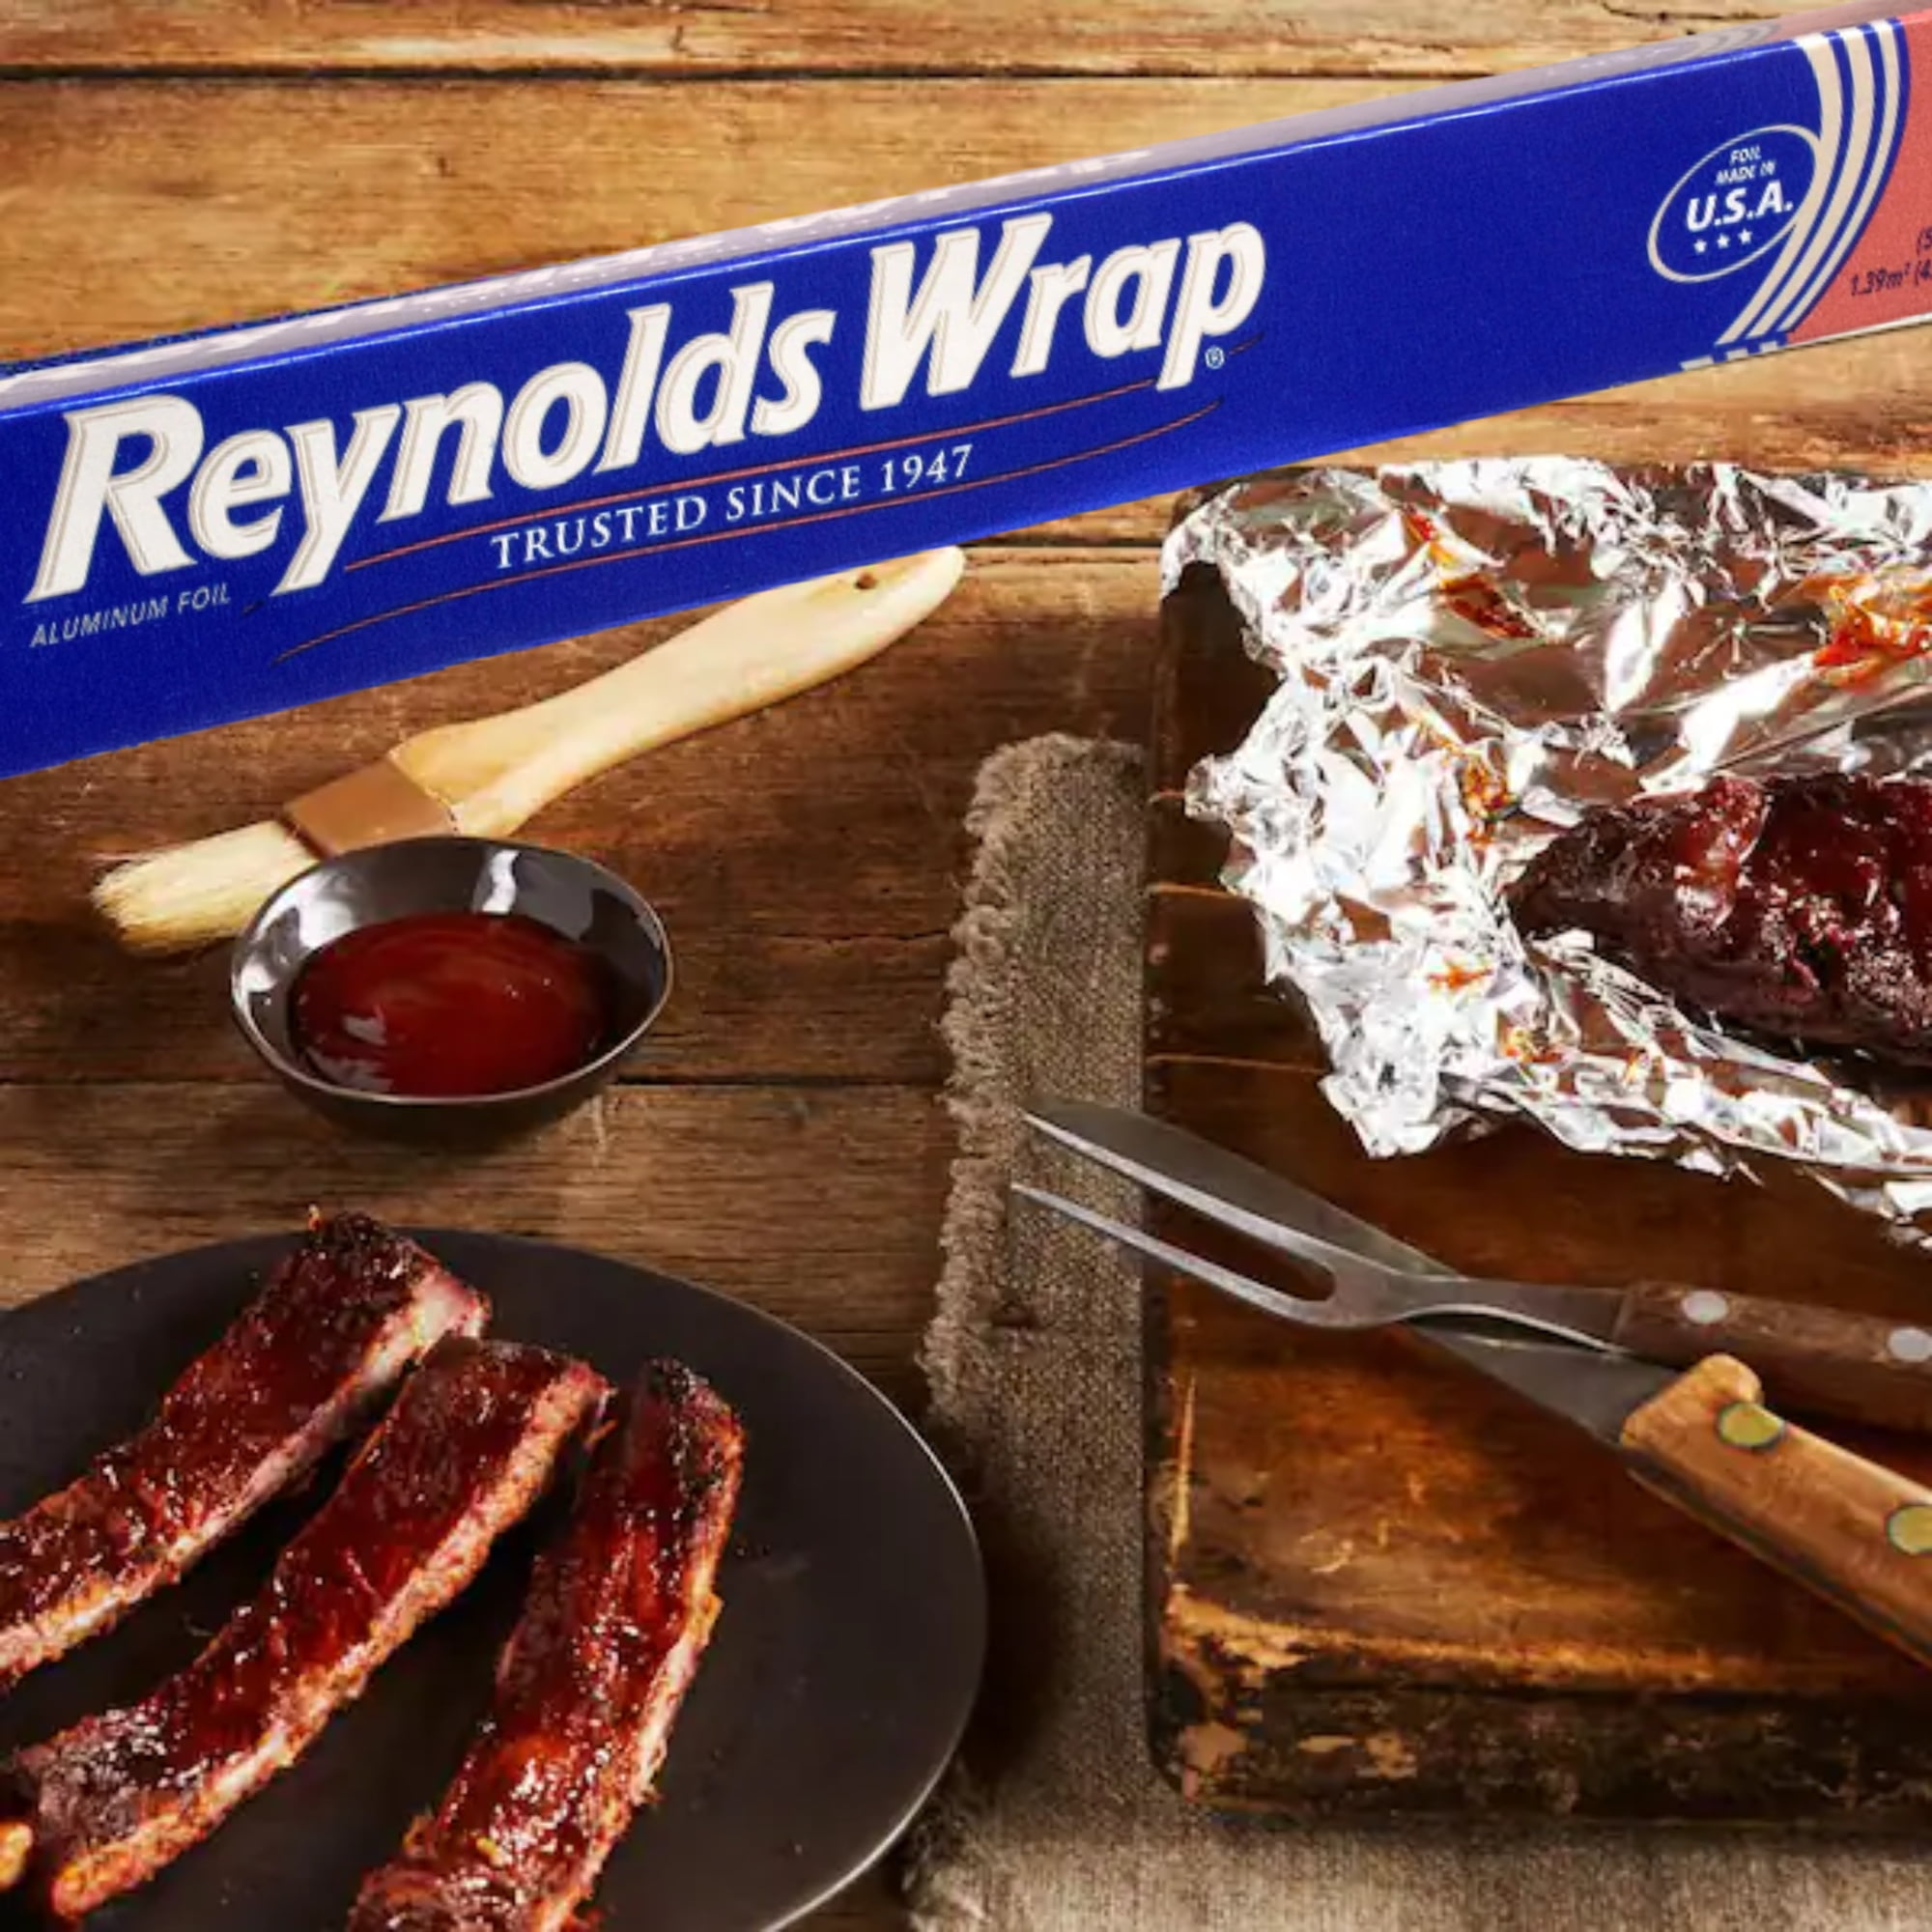 Reynolds Wrap Precut Foil Sheets - Pop Up & Non-stick Aluminum Foil for  Cooking Baking Wrapping Food Leftovers Sandwiches Burritos Home Kitchen  Supply